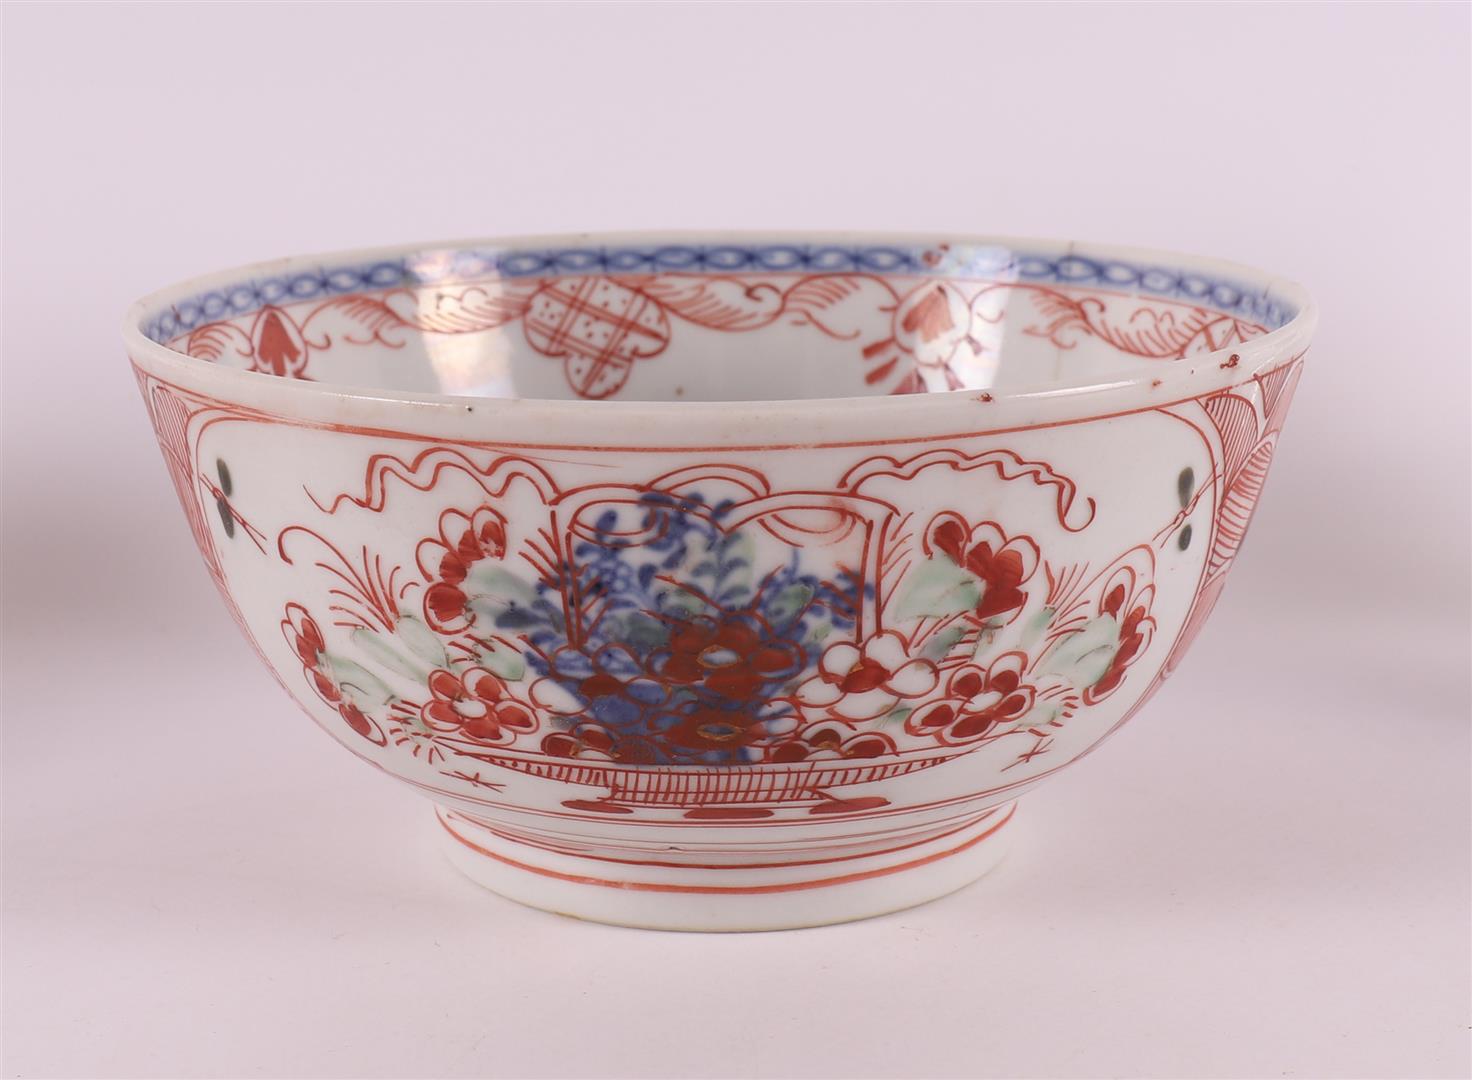 An Amsterdam colorful porcelain bowl, China, Qianglong, 18th century. Polychrome decoration of - Image 2 of 20